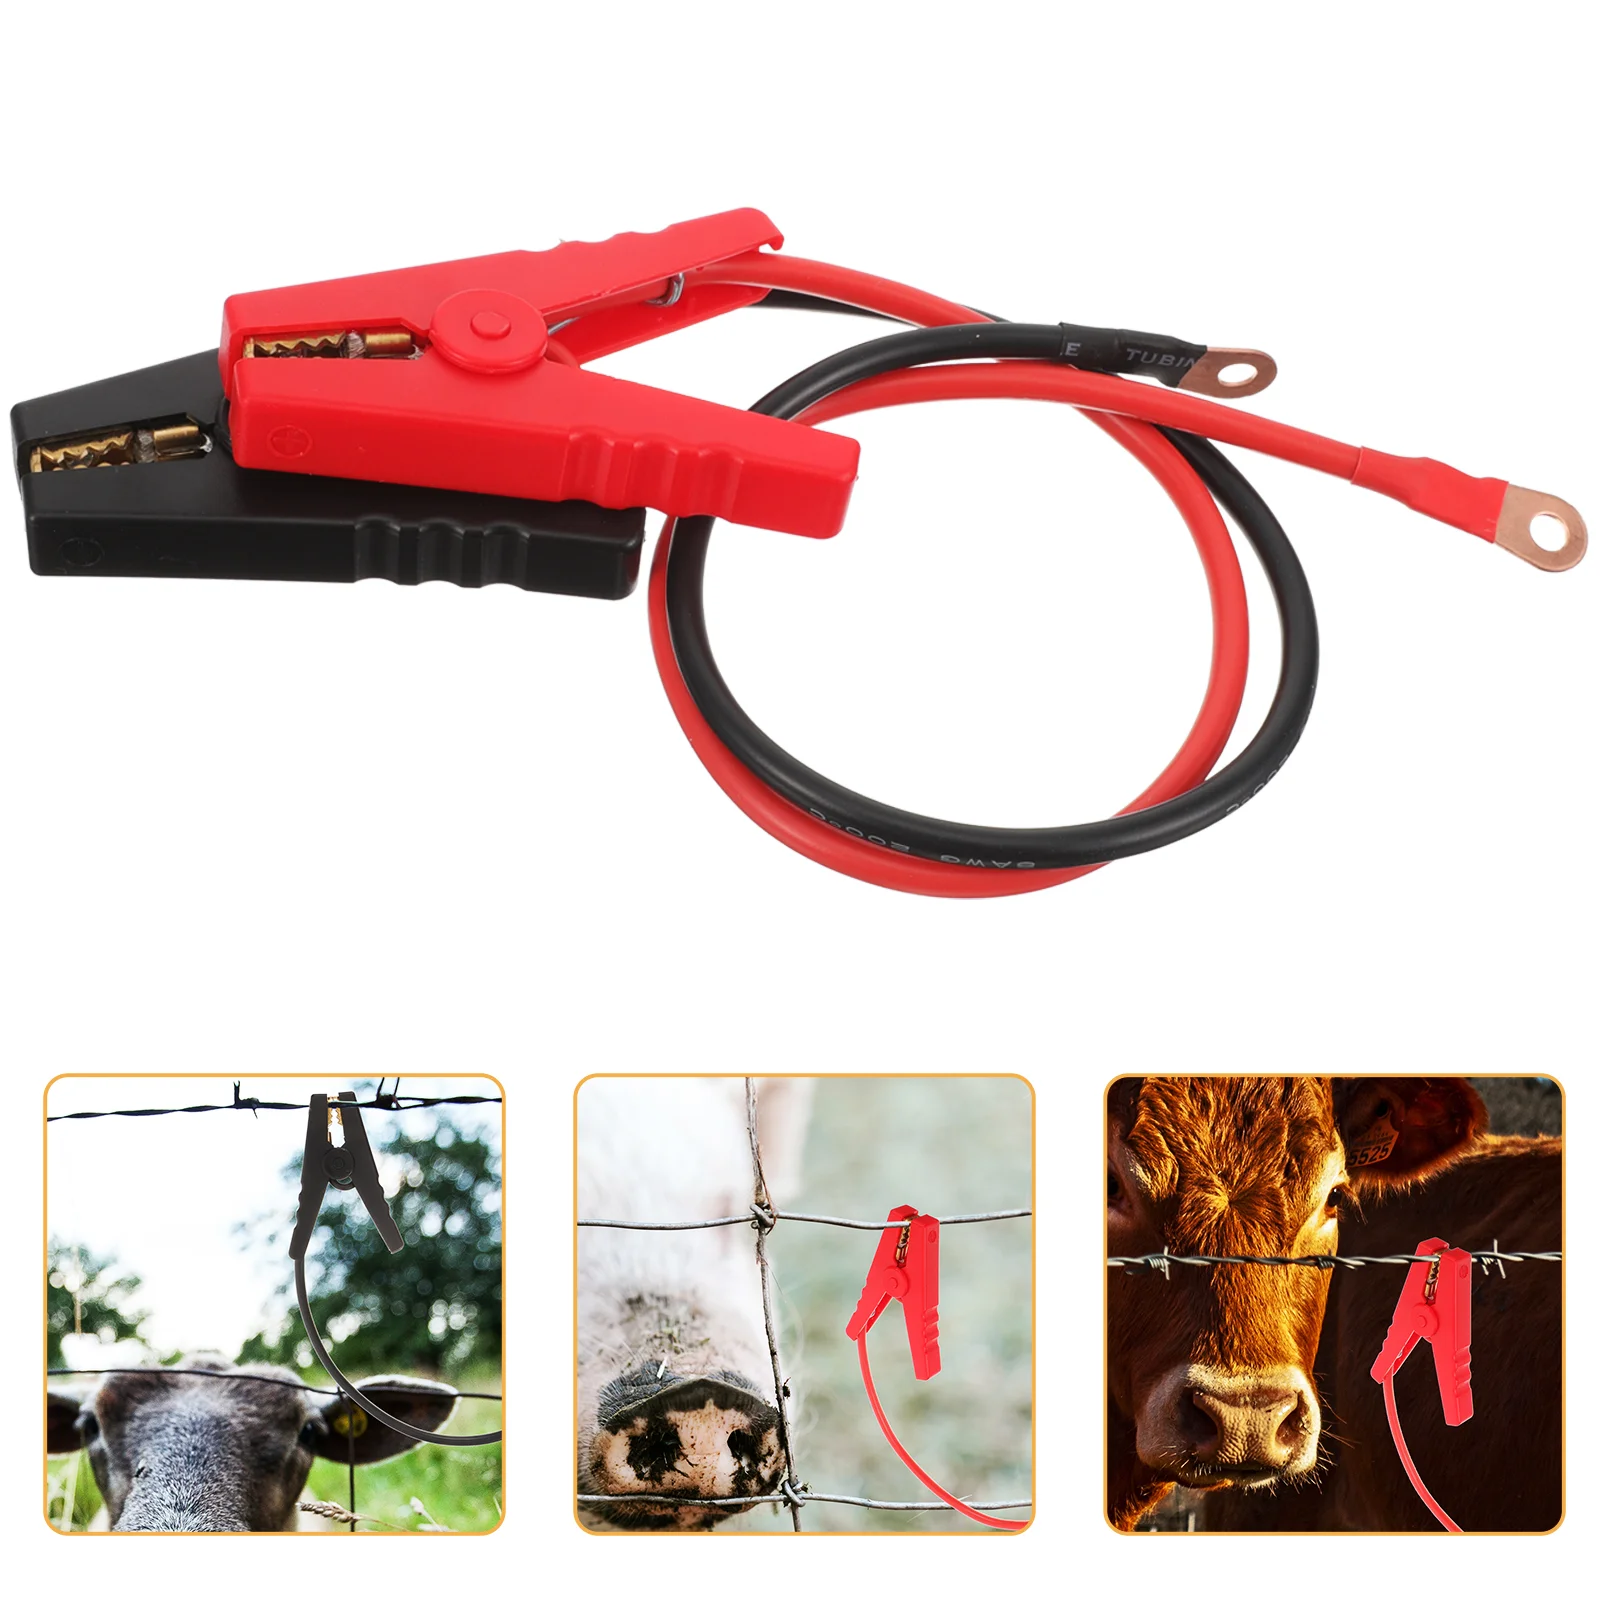 

2 Pcs Electric Farm Fence Jump Connector Alligator Clips Lead Cables Leads Chargers for Livestock Accessory